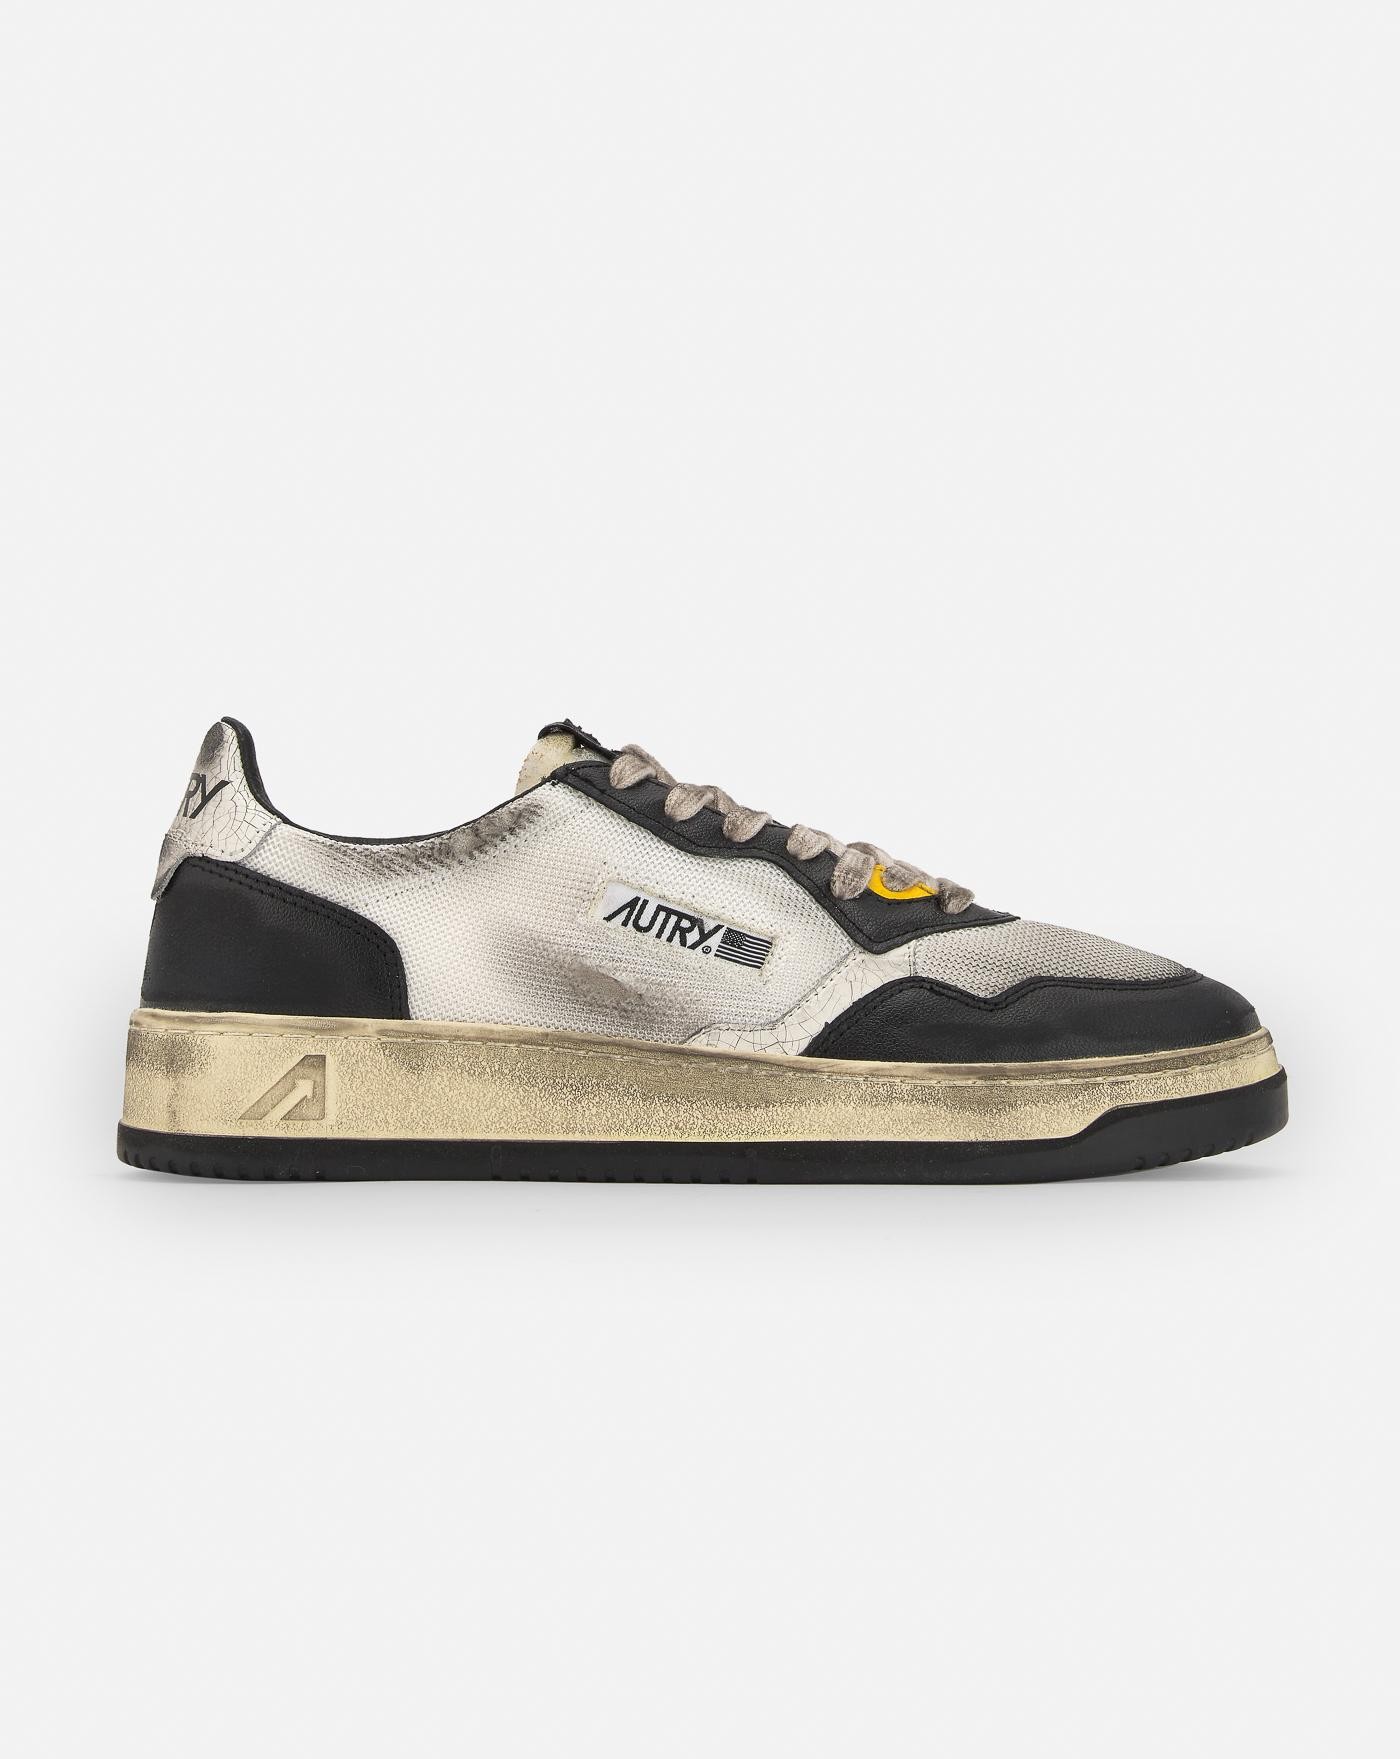 Autry  SUPER VINTAGE LOW SNEAKERS IN MESH AND SUEDE COLOR WHITE AND BLACK